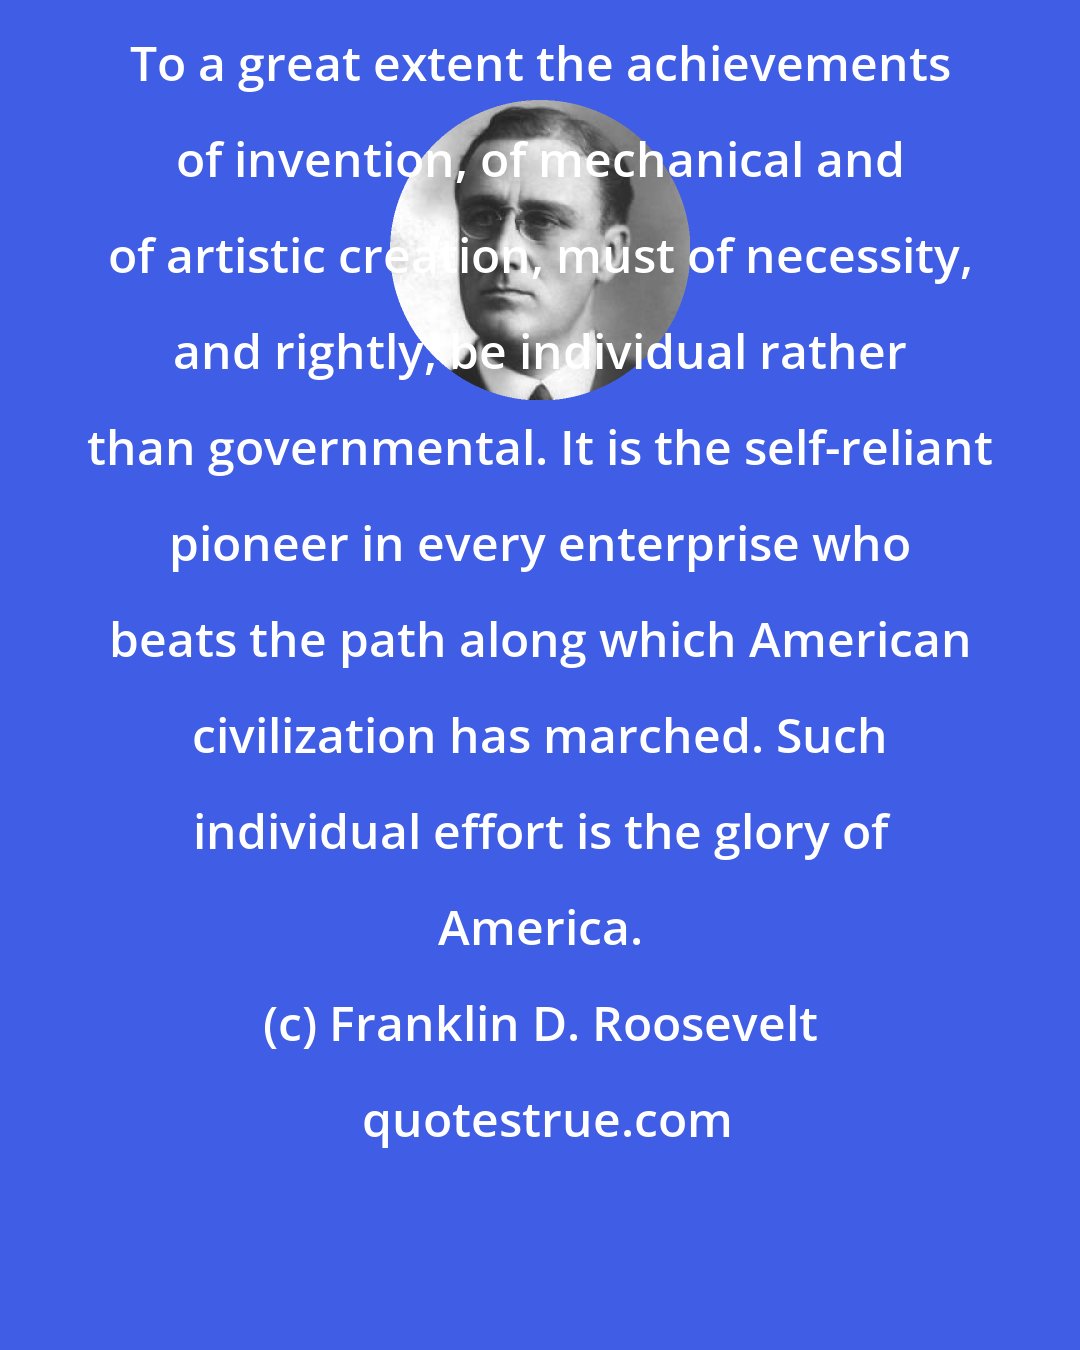 Franklin D. Roosevelt: To a great extent the achievements of invention, of mechanical and of artistic creation, must of necessity, and rightly, be individual rather than governmental. It is the self-reliant pioneer in every enterprise who beats the path along which American civilization has marched. Such individual effort is the glory of America.